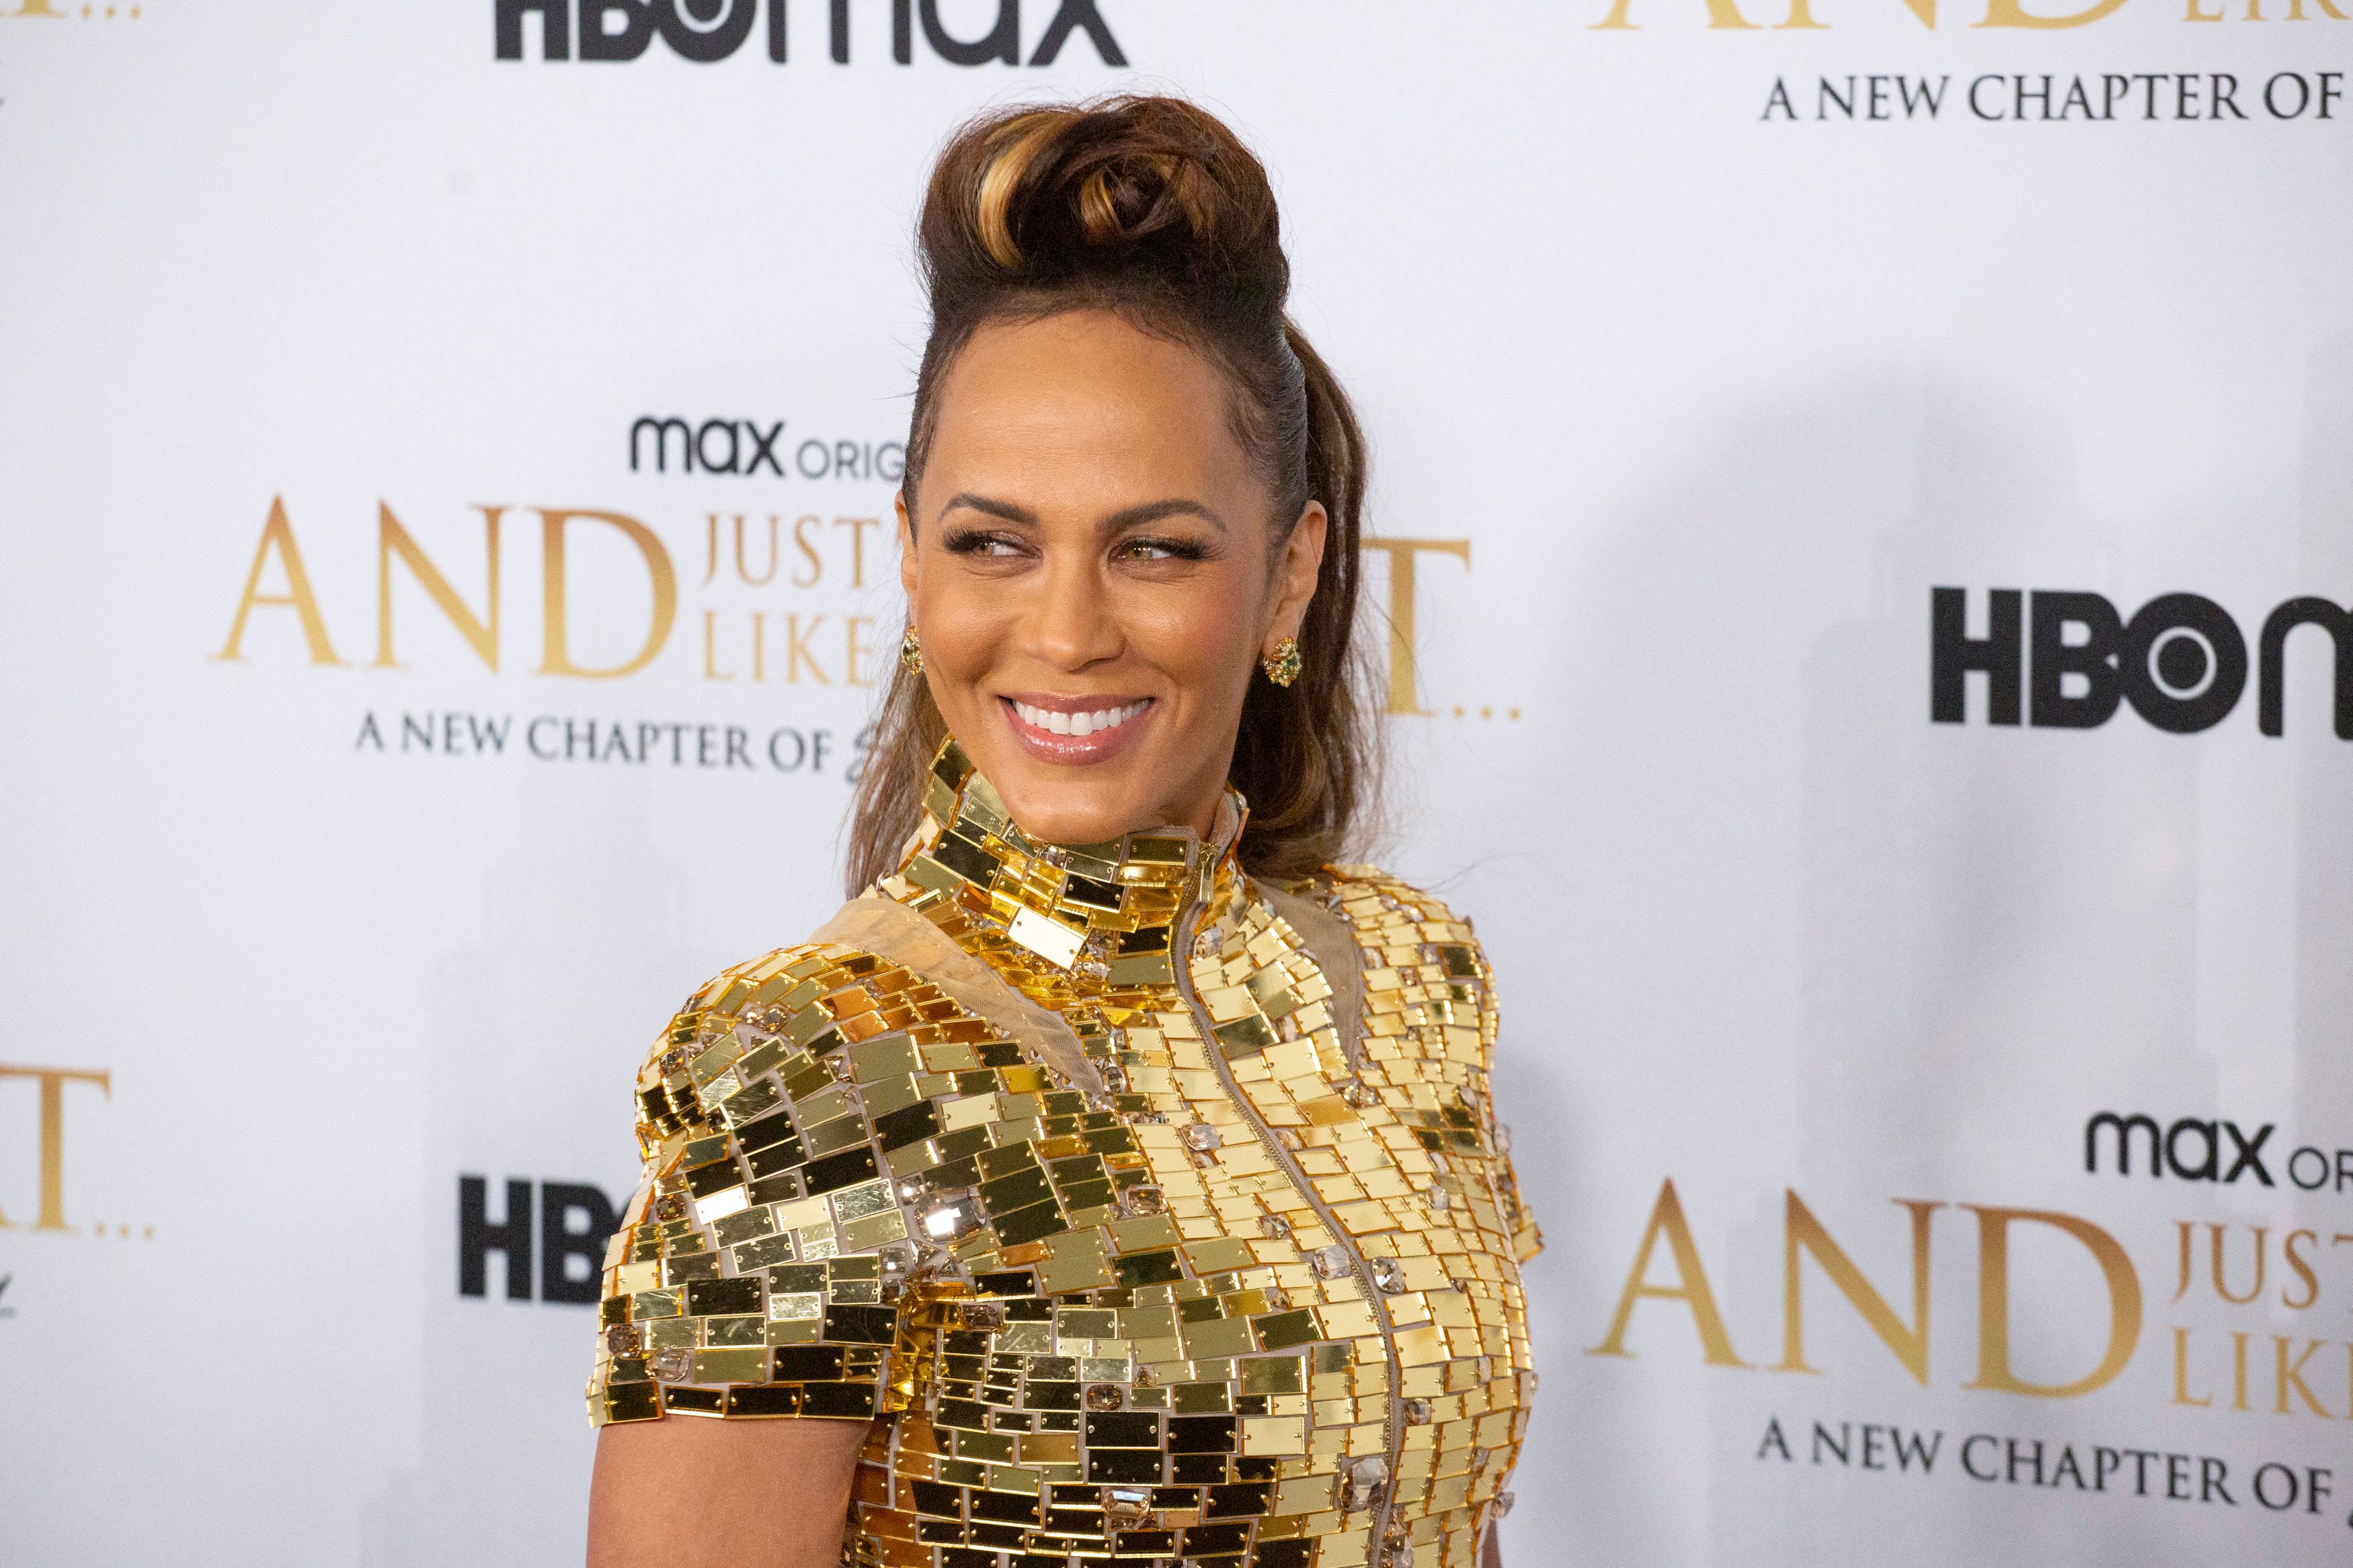 'And Just Like That...' actor Nicole Ari Parker wearing a gold dress during the show's premiere.